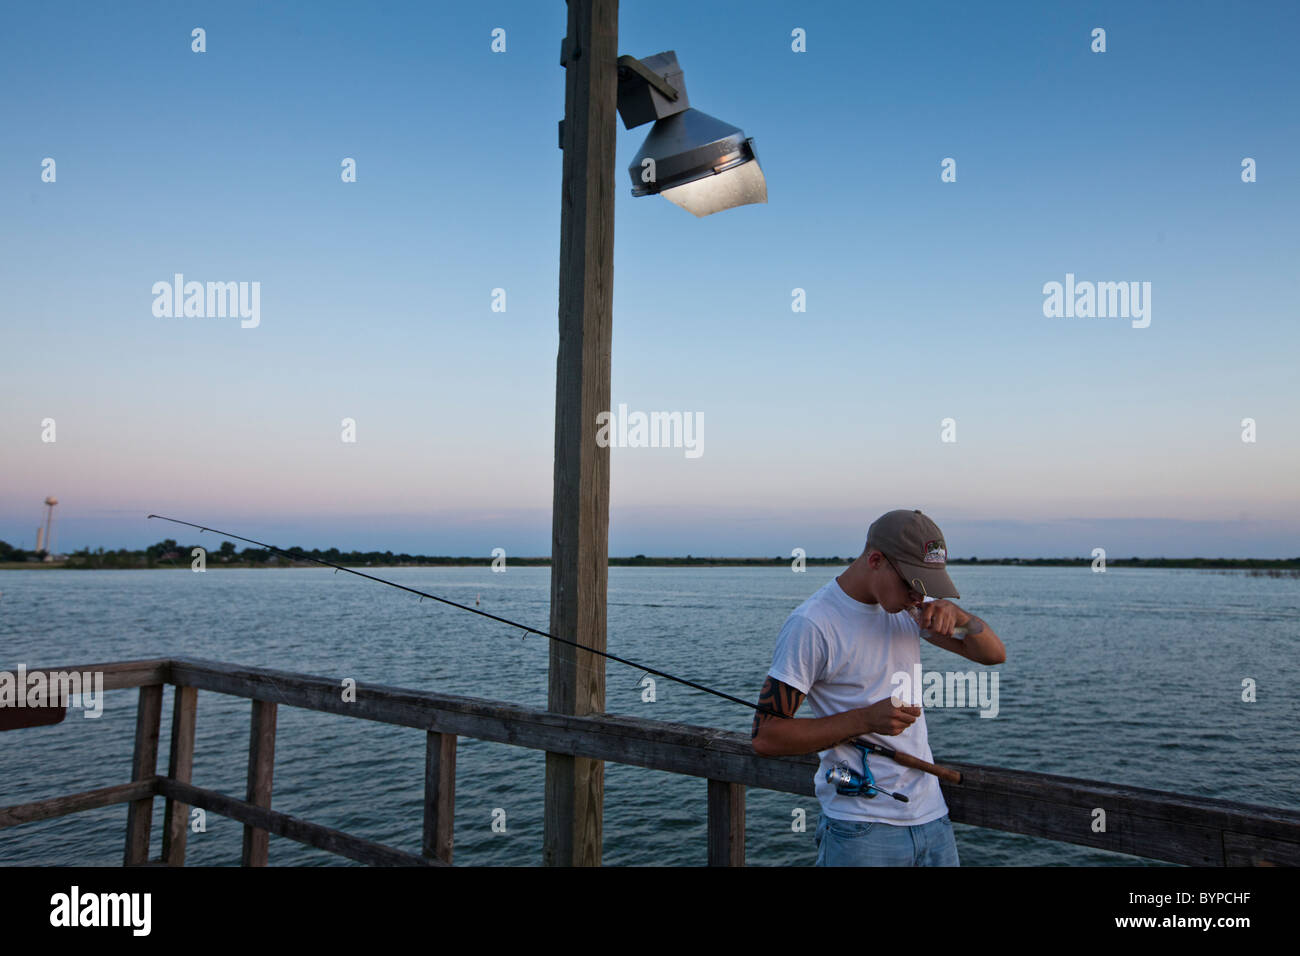 USA, Texas, Lake Arrowroot State Park, Young man kisses fish for good luck while fishing from public dock on summer evening Stock Photo